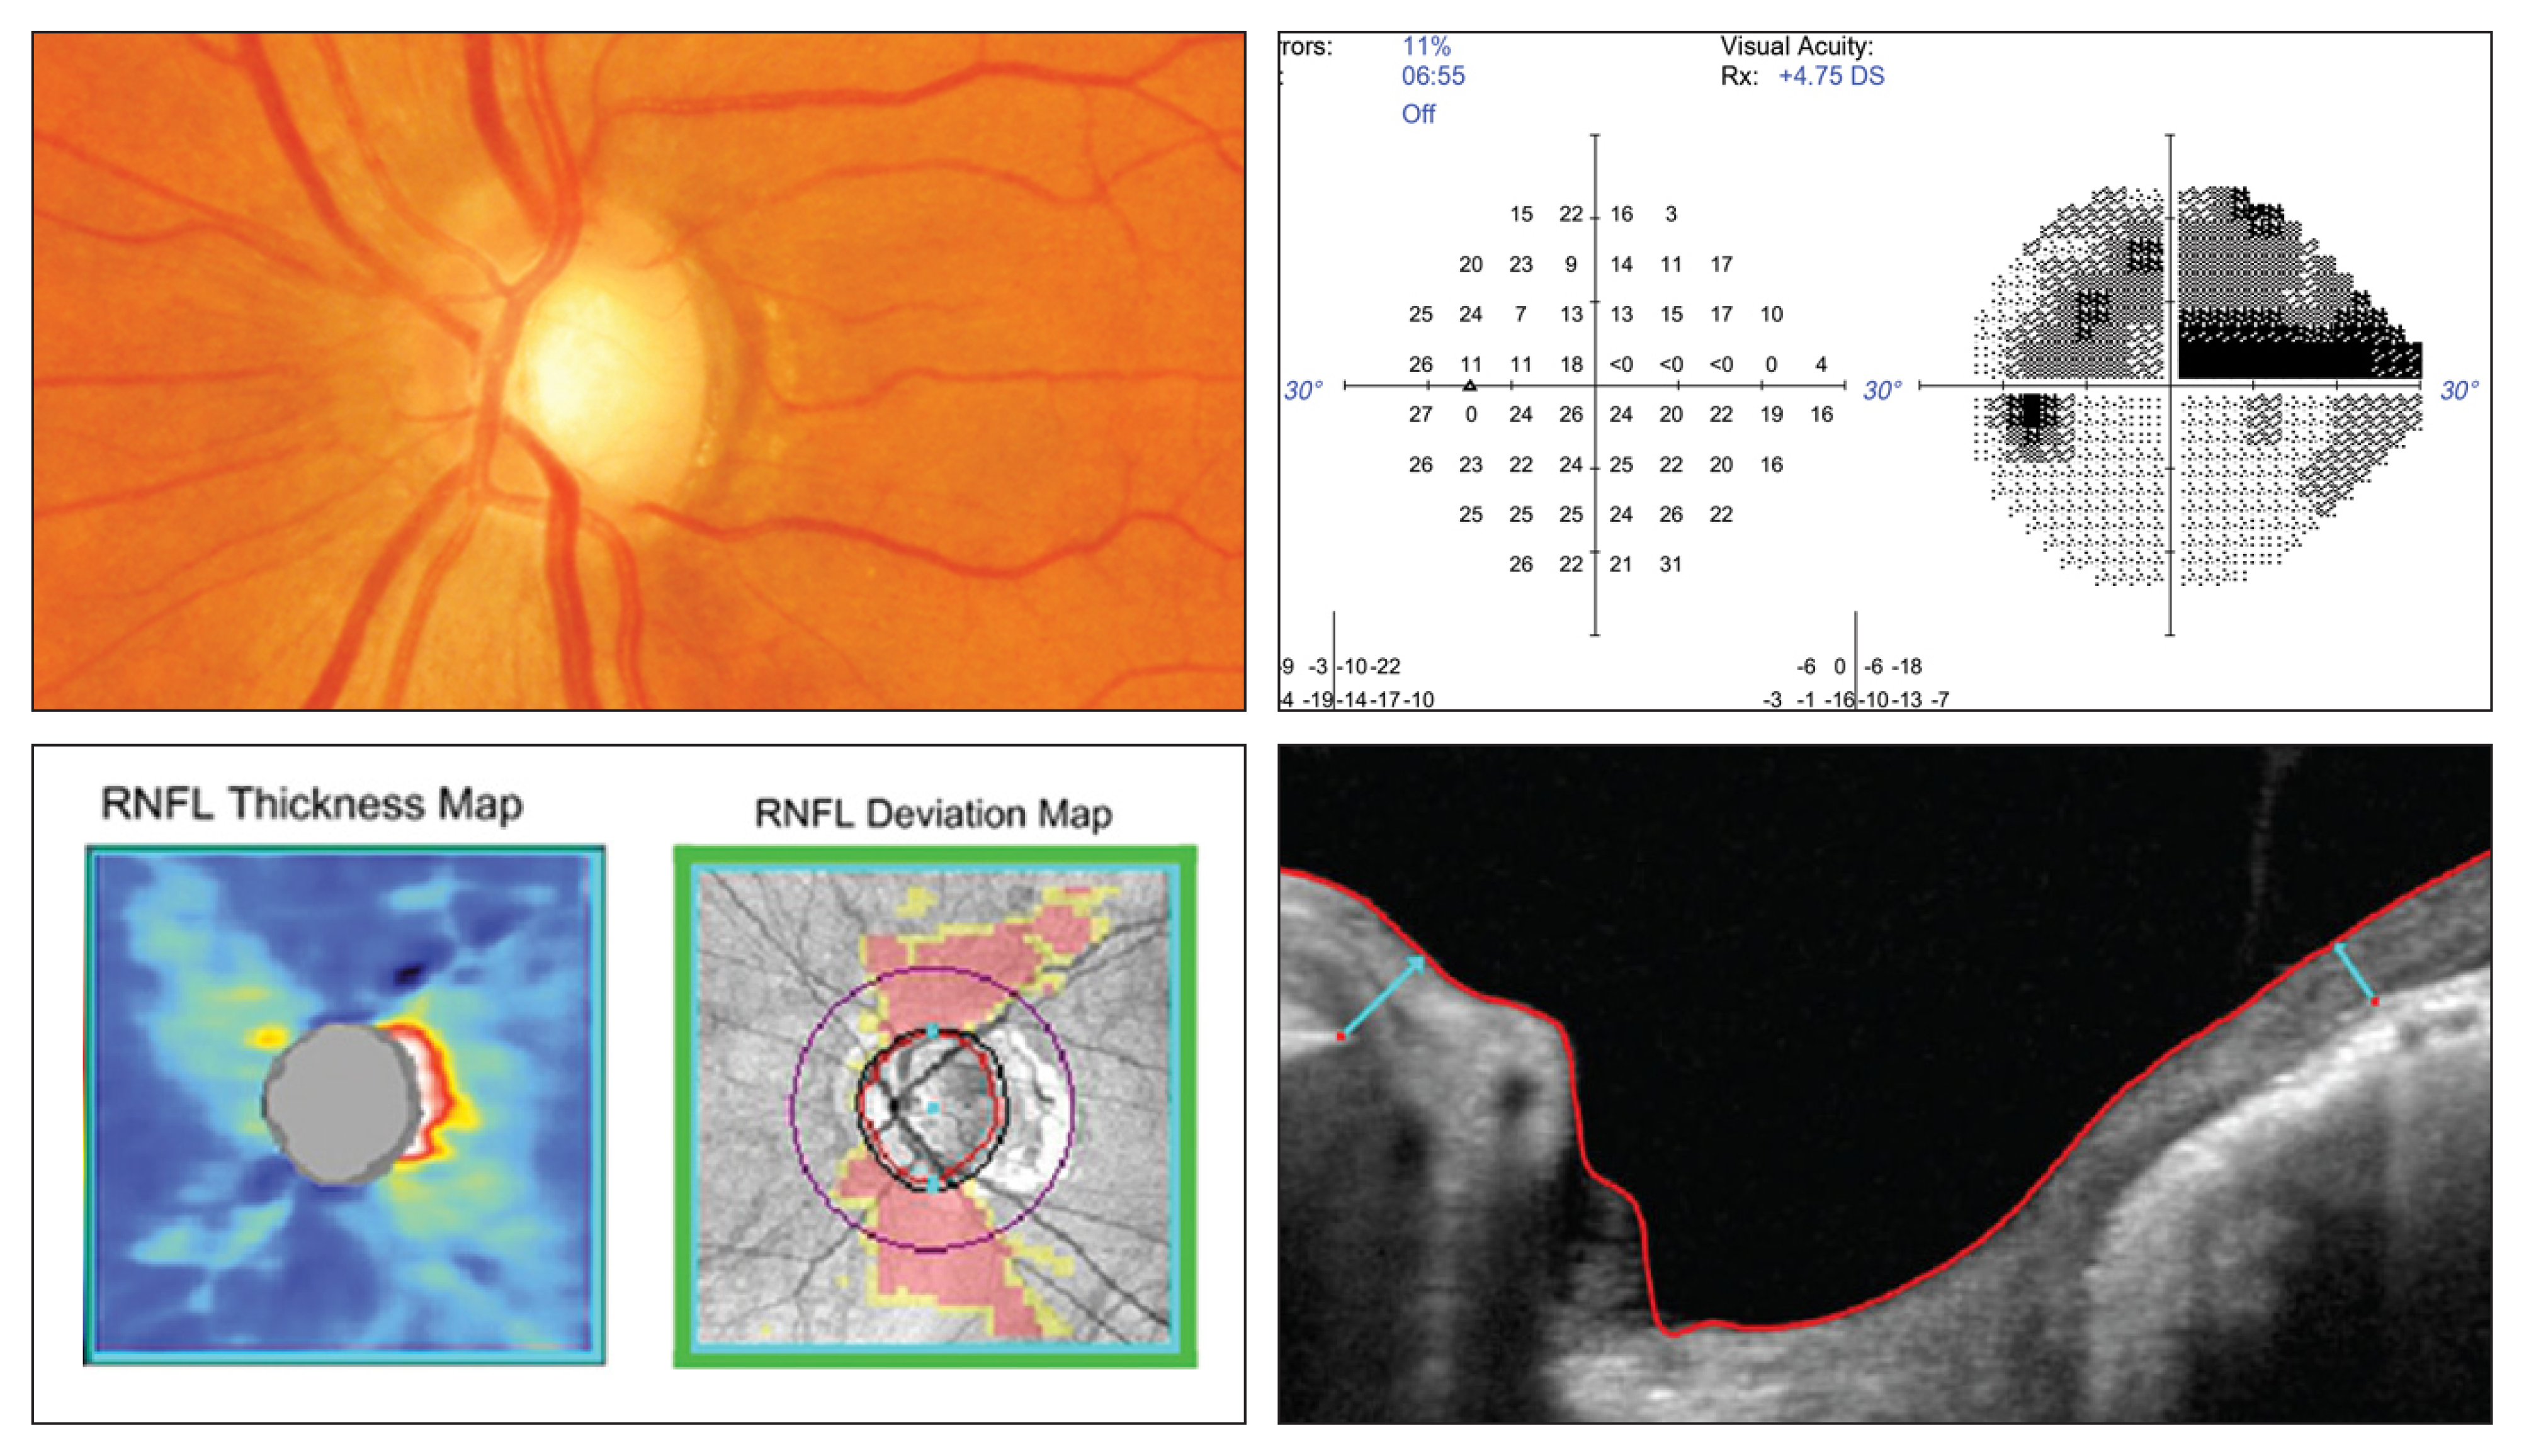 Over a five-year period, it was rare for all four tests of structure and function—optic nerve head assessment, visual fields, RNFL thickness and BMO minimum rim width—to progress, (only 6.5% of eyes). Instead, progression is usually detected by just one or two tests (41.1% by only one test; 21.8% by two tests, respectively).